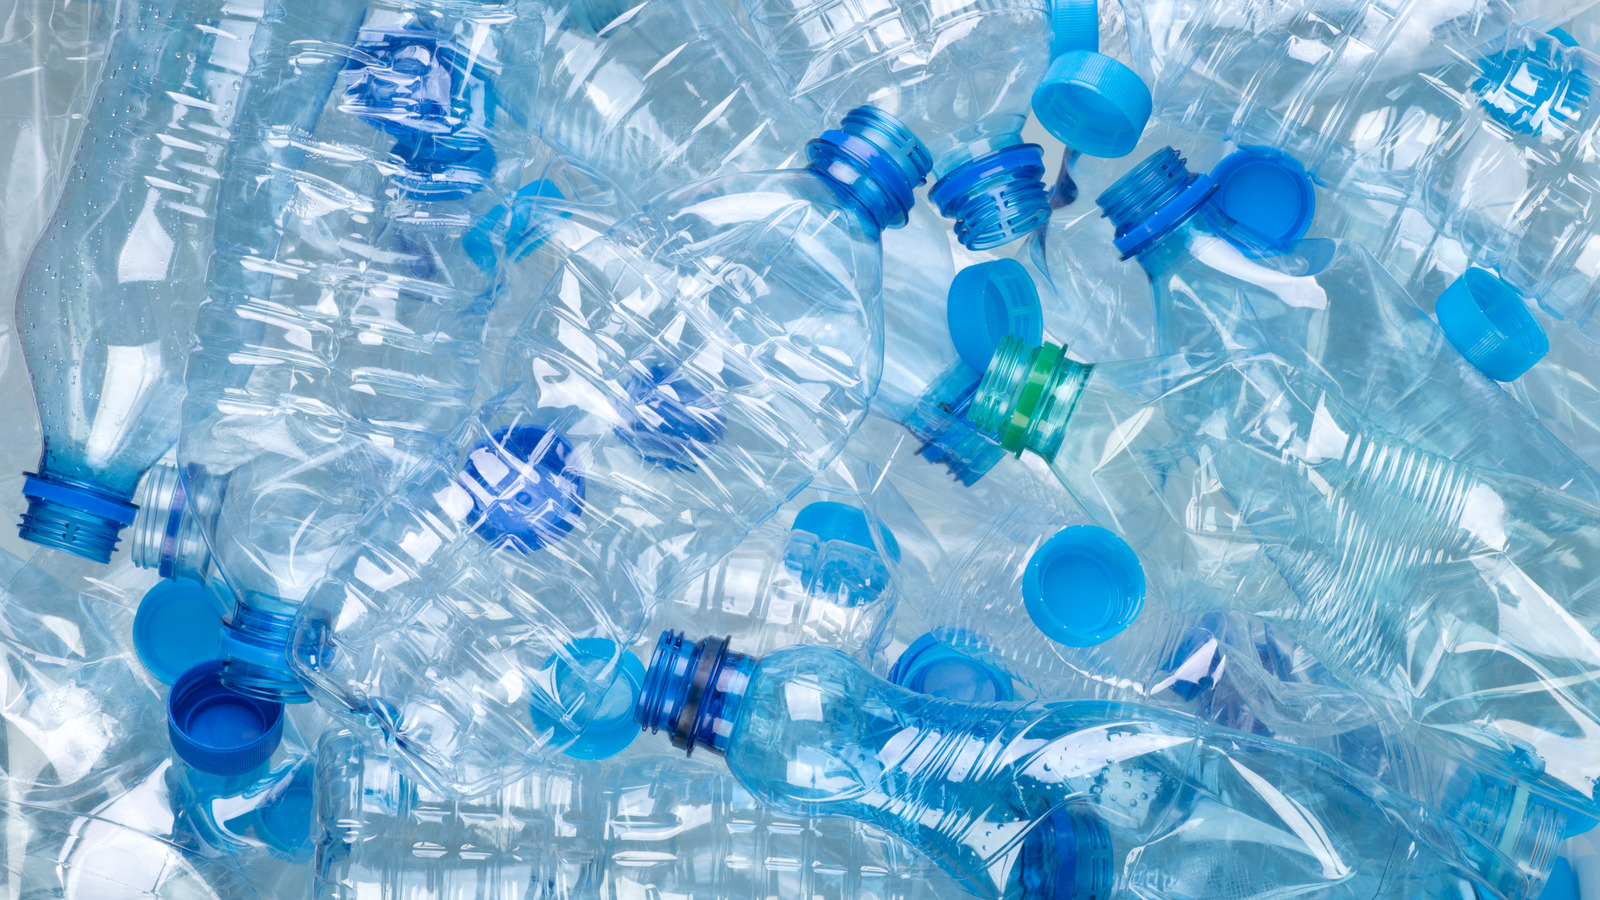 https://www.foodrepublic.com/img/gallery/you-should-probably-stop-refilling-plastic-water-bottles/l-intro-1686249800.jpg